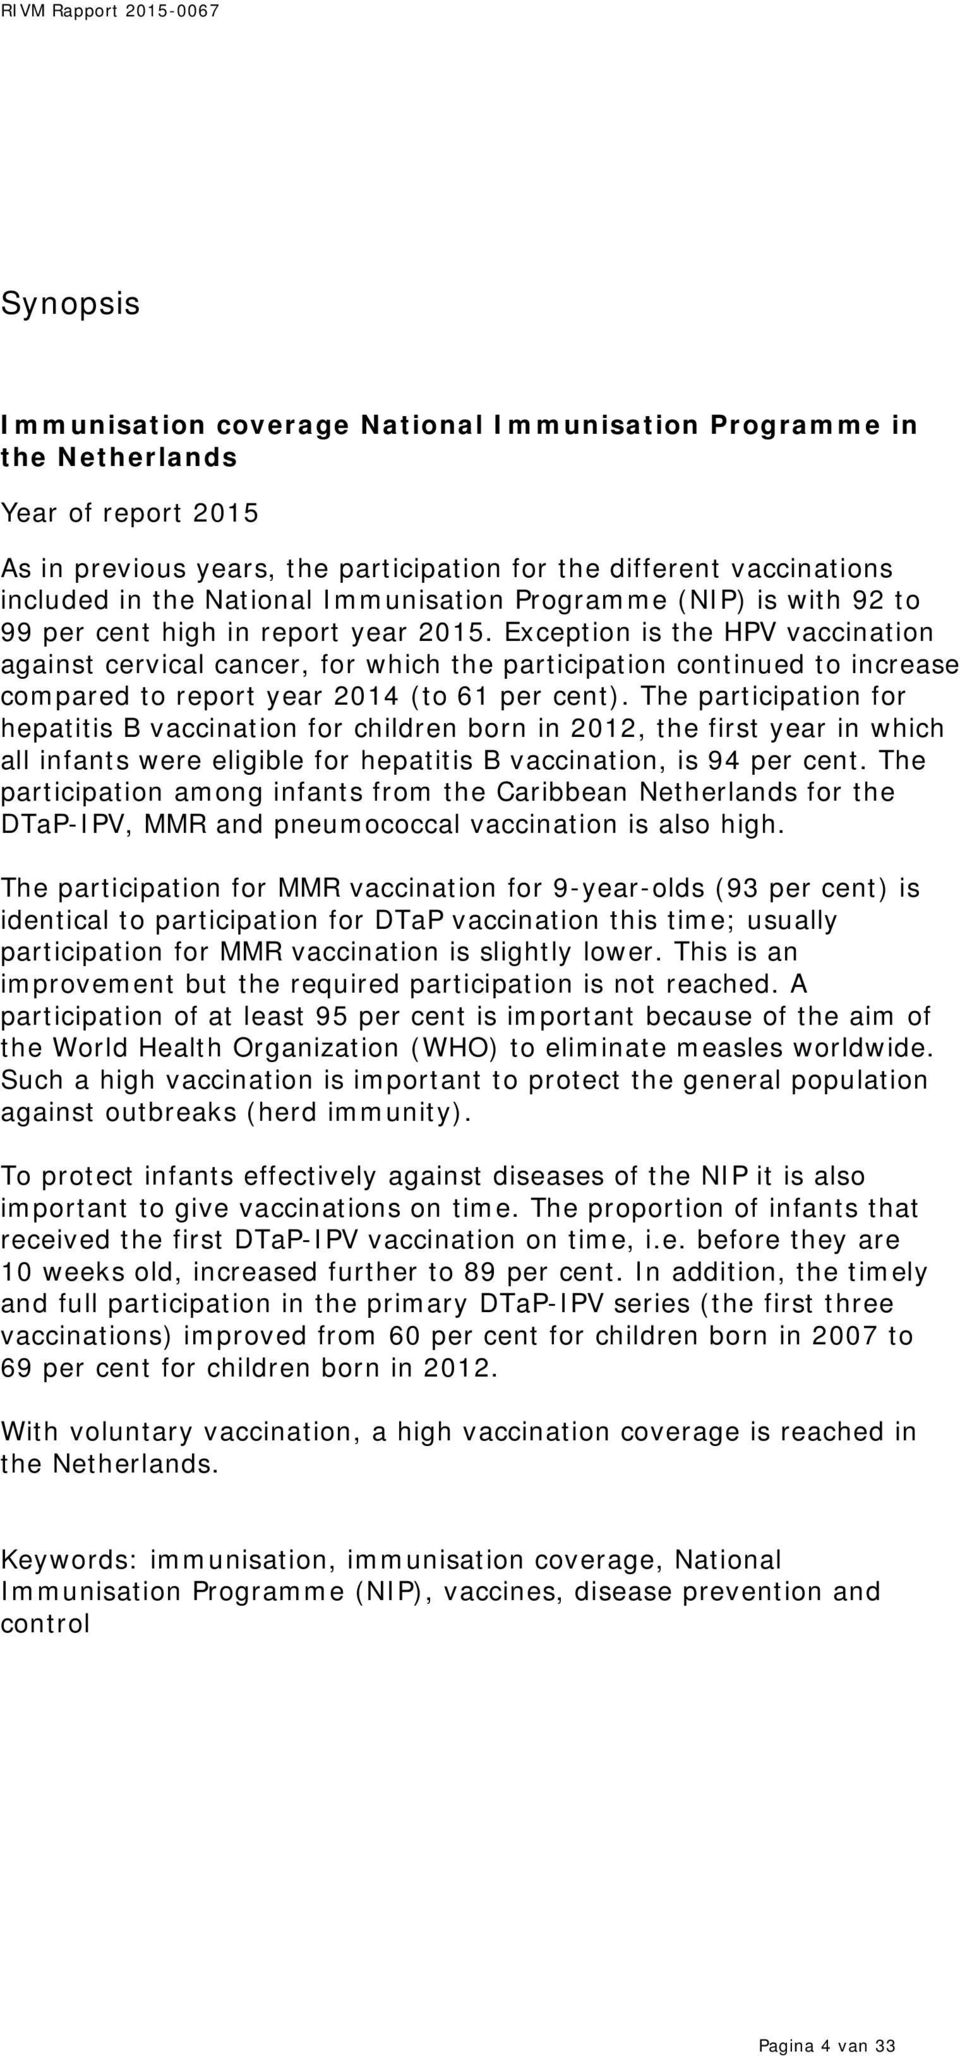 Exception is the HPV vaccination against cervical cancer, for which the participation continued to increase compared to report year 2014 (to 61 per cent).